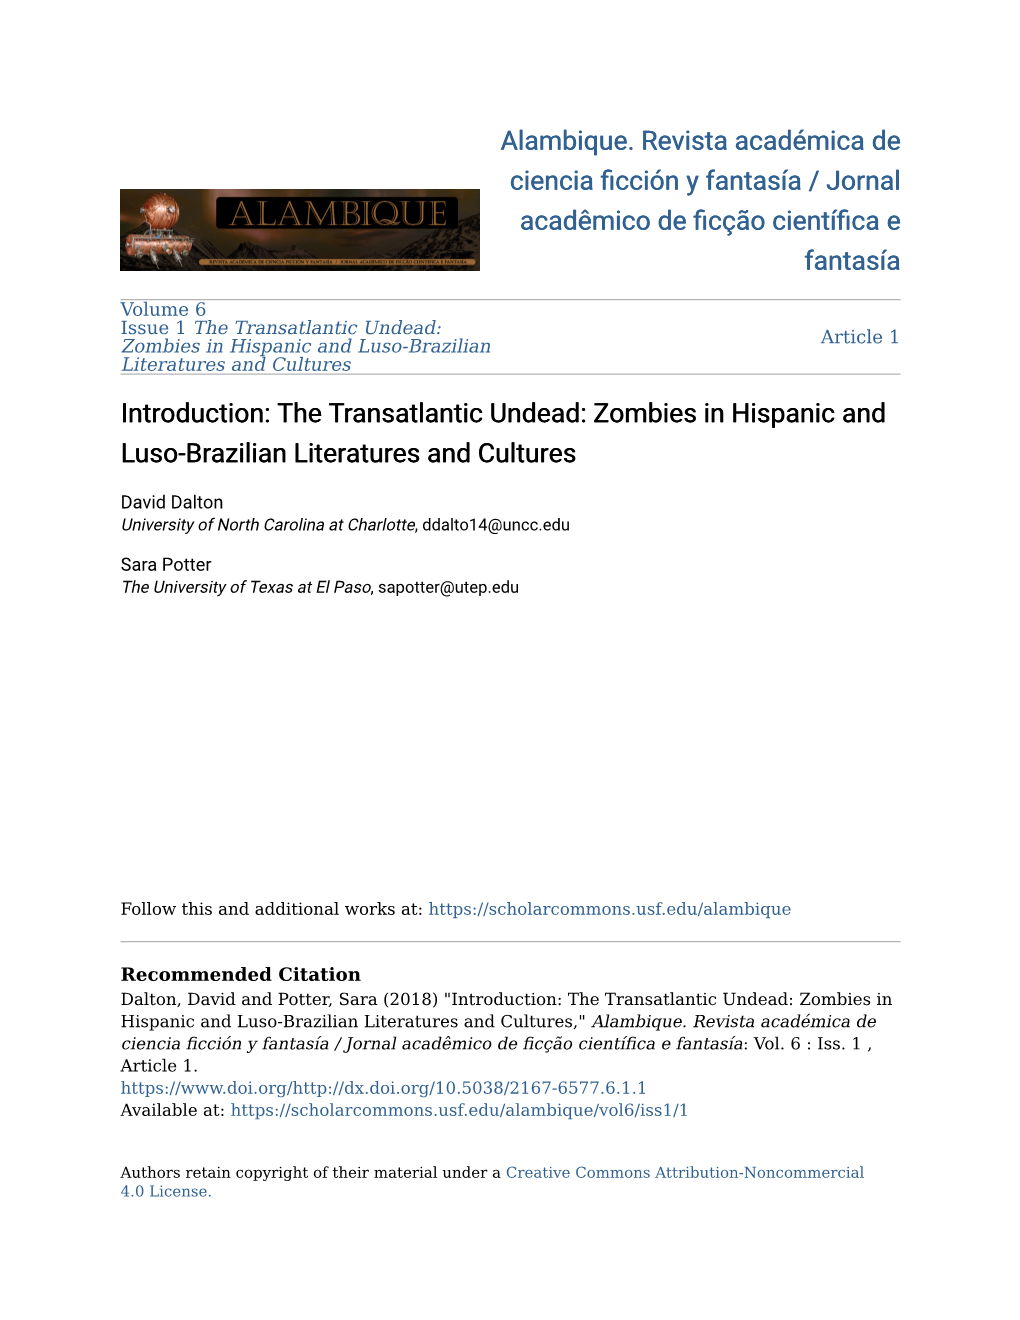 The Transatlantic Undead: Zombies in Hispanic and Luso-Brazilian Article 1 Literatures and Cultures